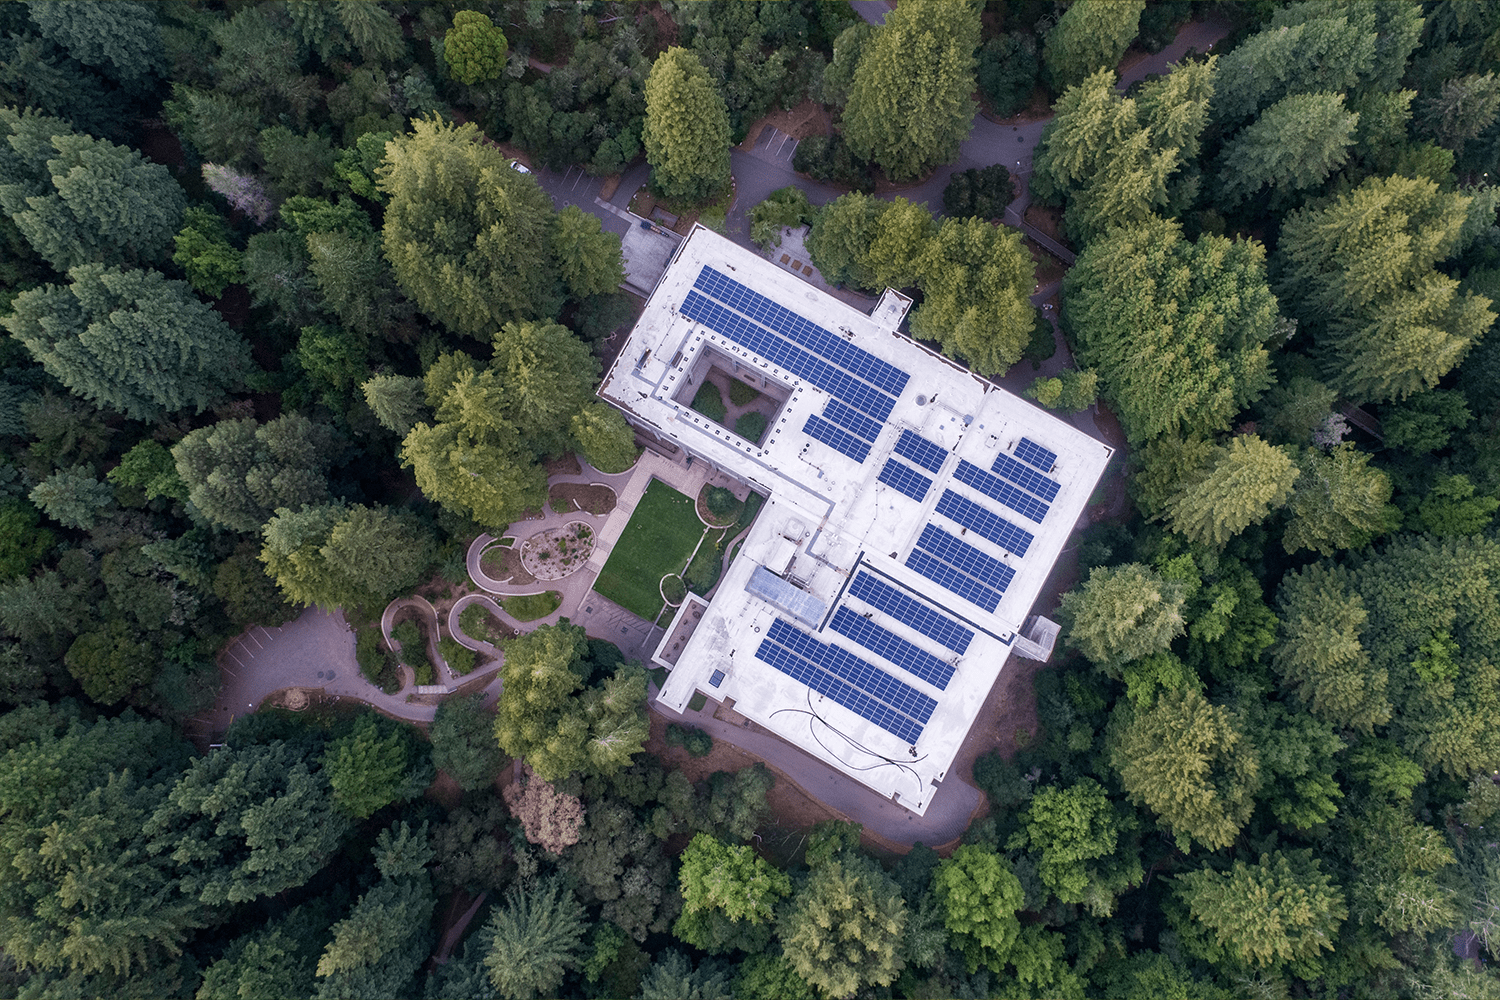 Aerial view: building with white roof with blue, surrounded by trees.